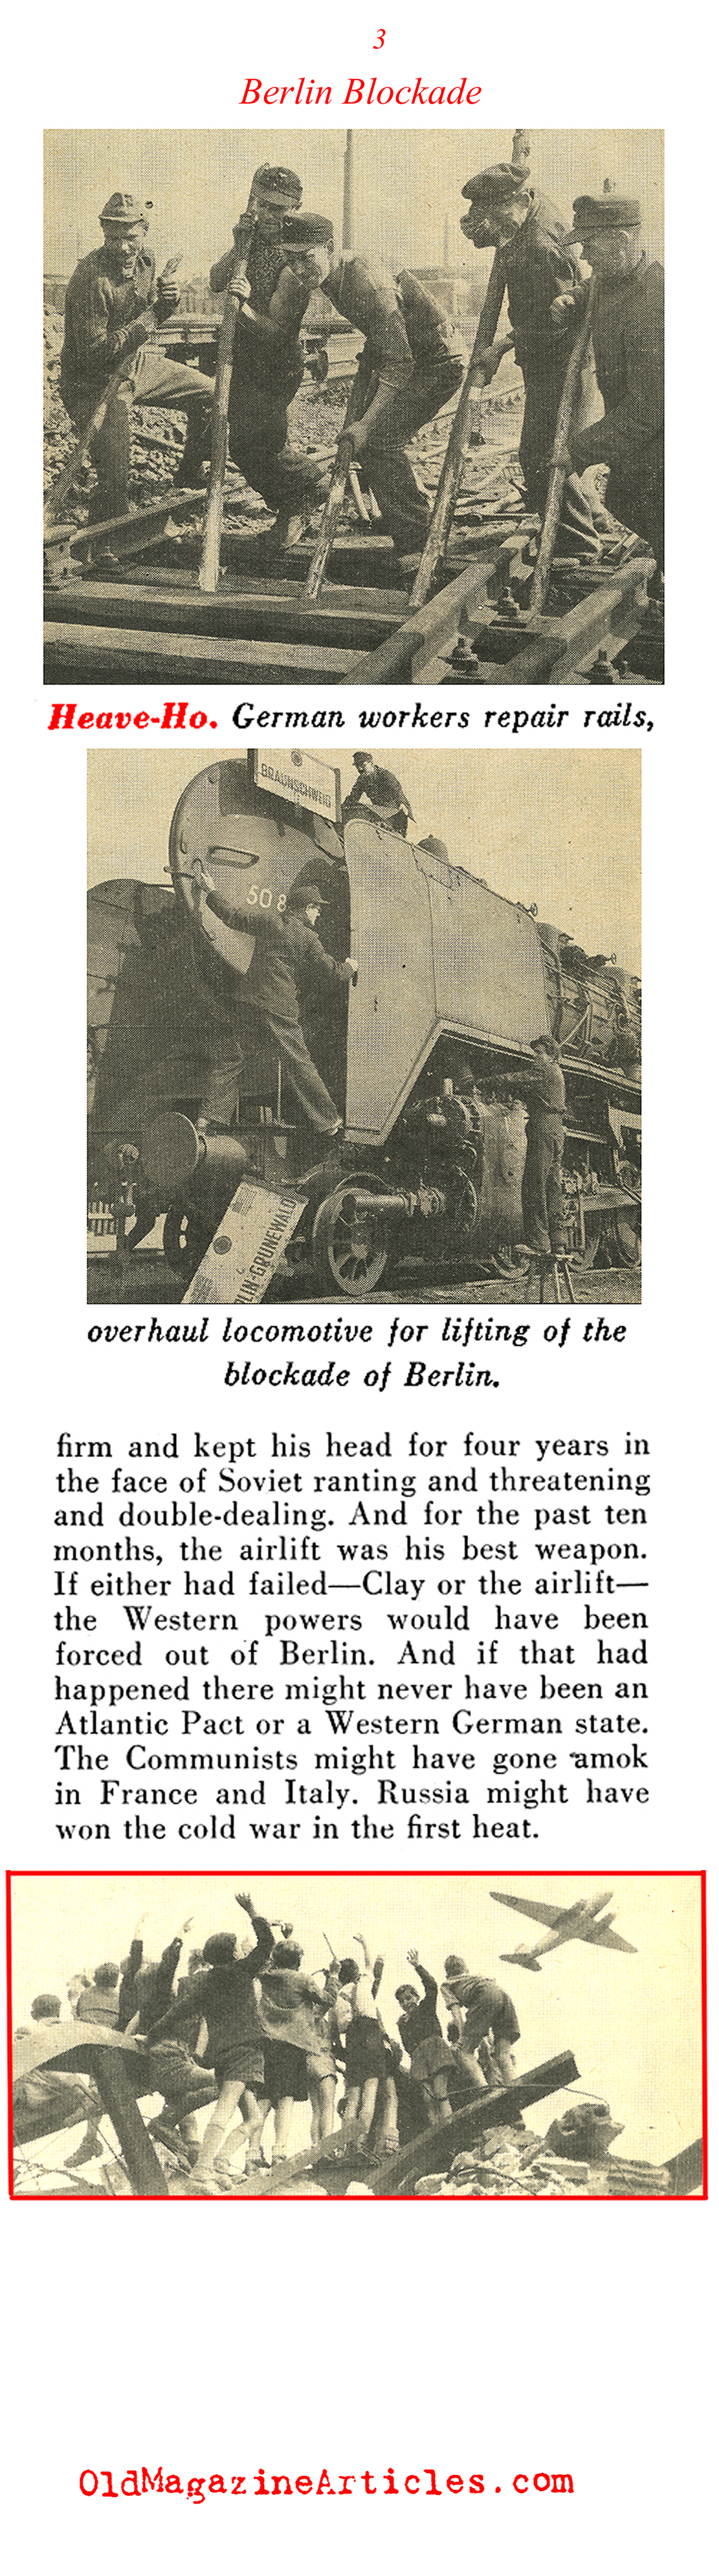 A Look Back at the Berlin Air-Lift (Pathfinder Magazine, 1949)